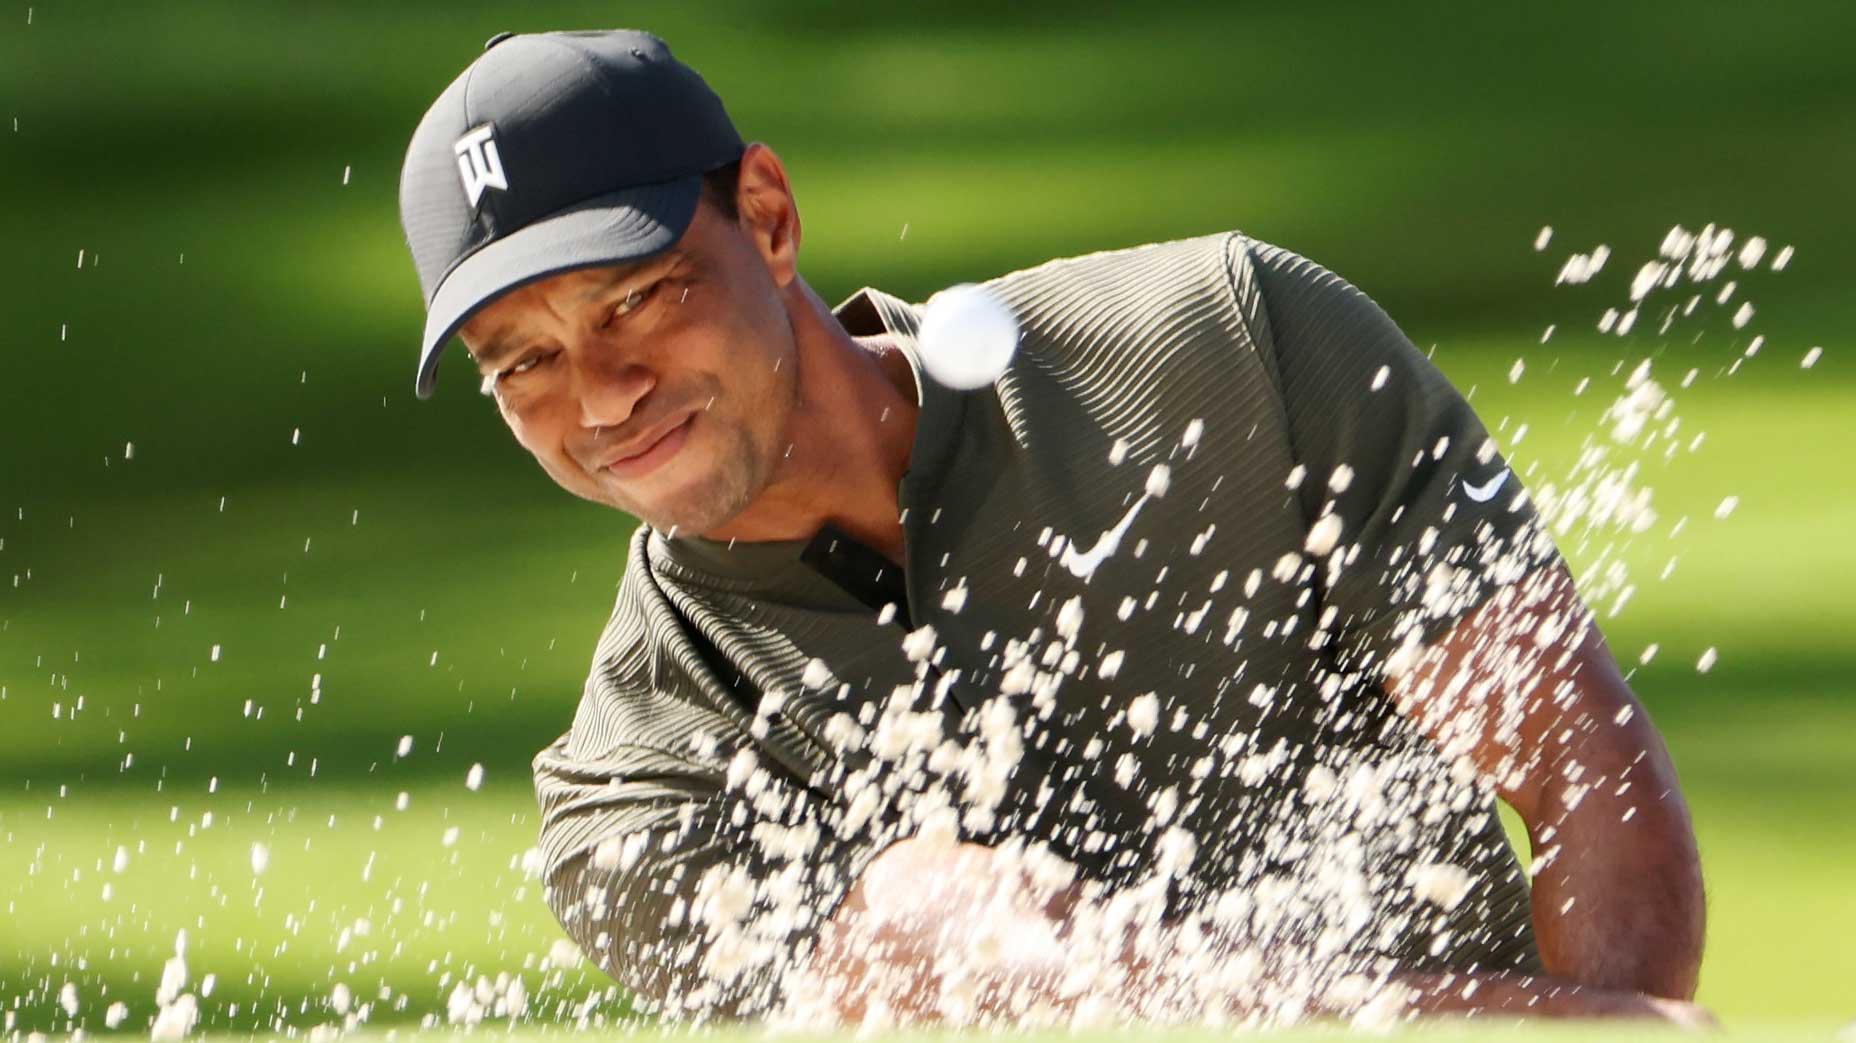 Tiger Woods' Masters defense begins with a record round